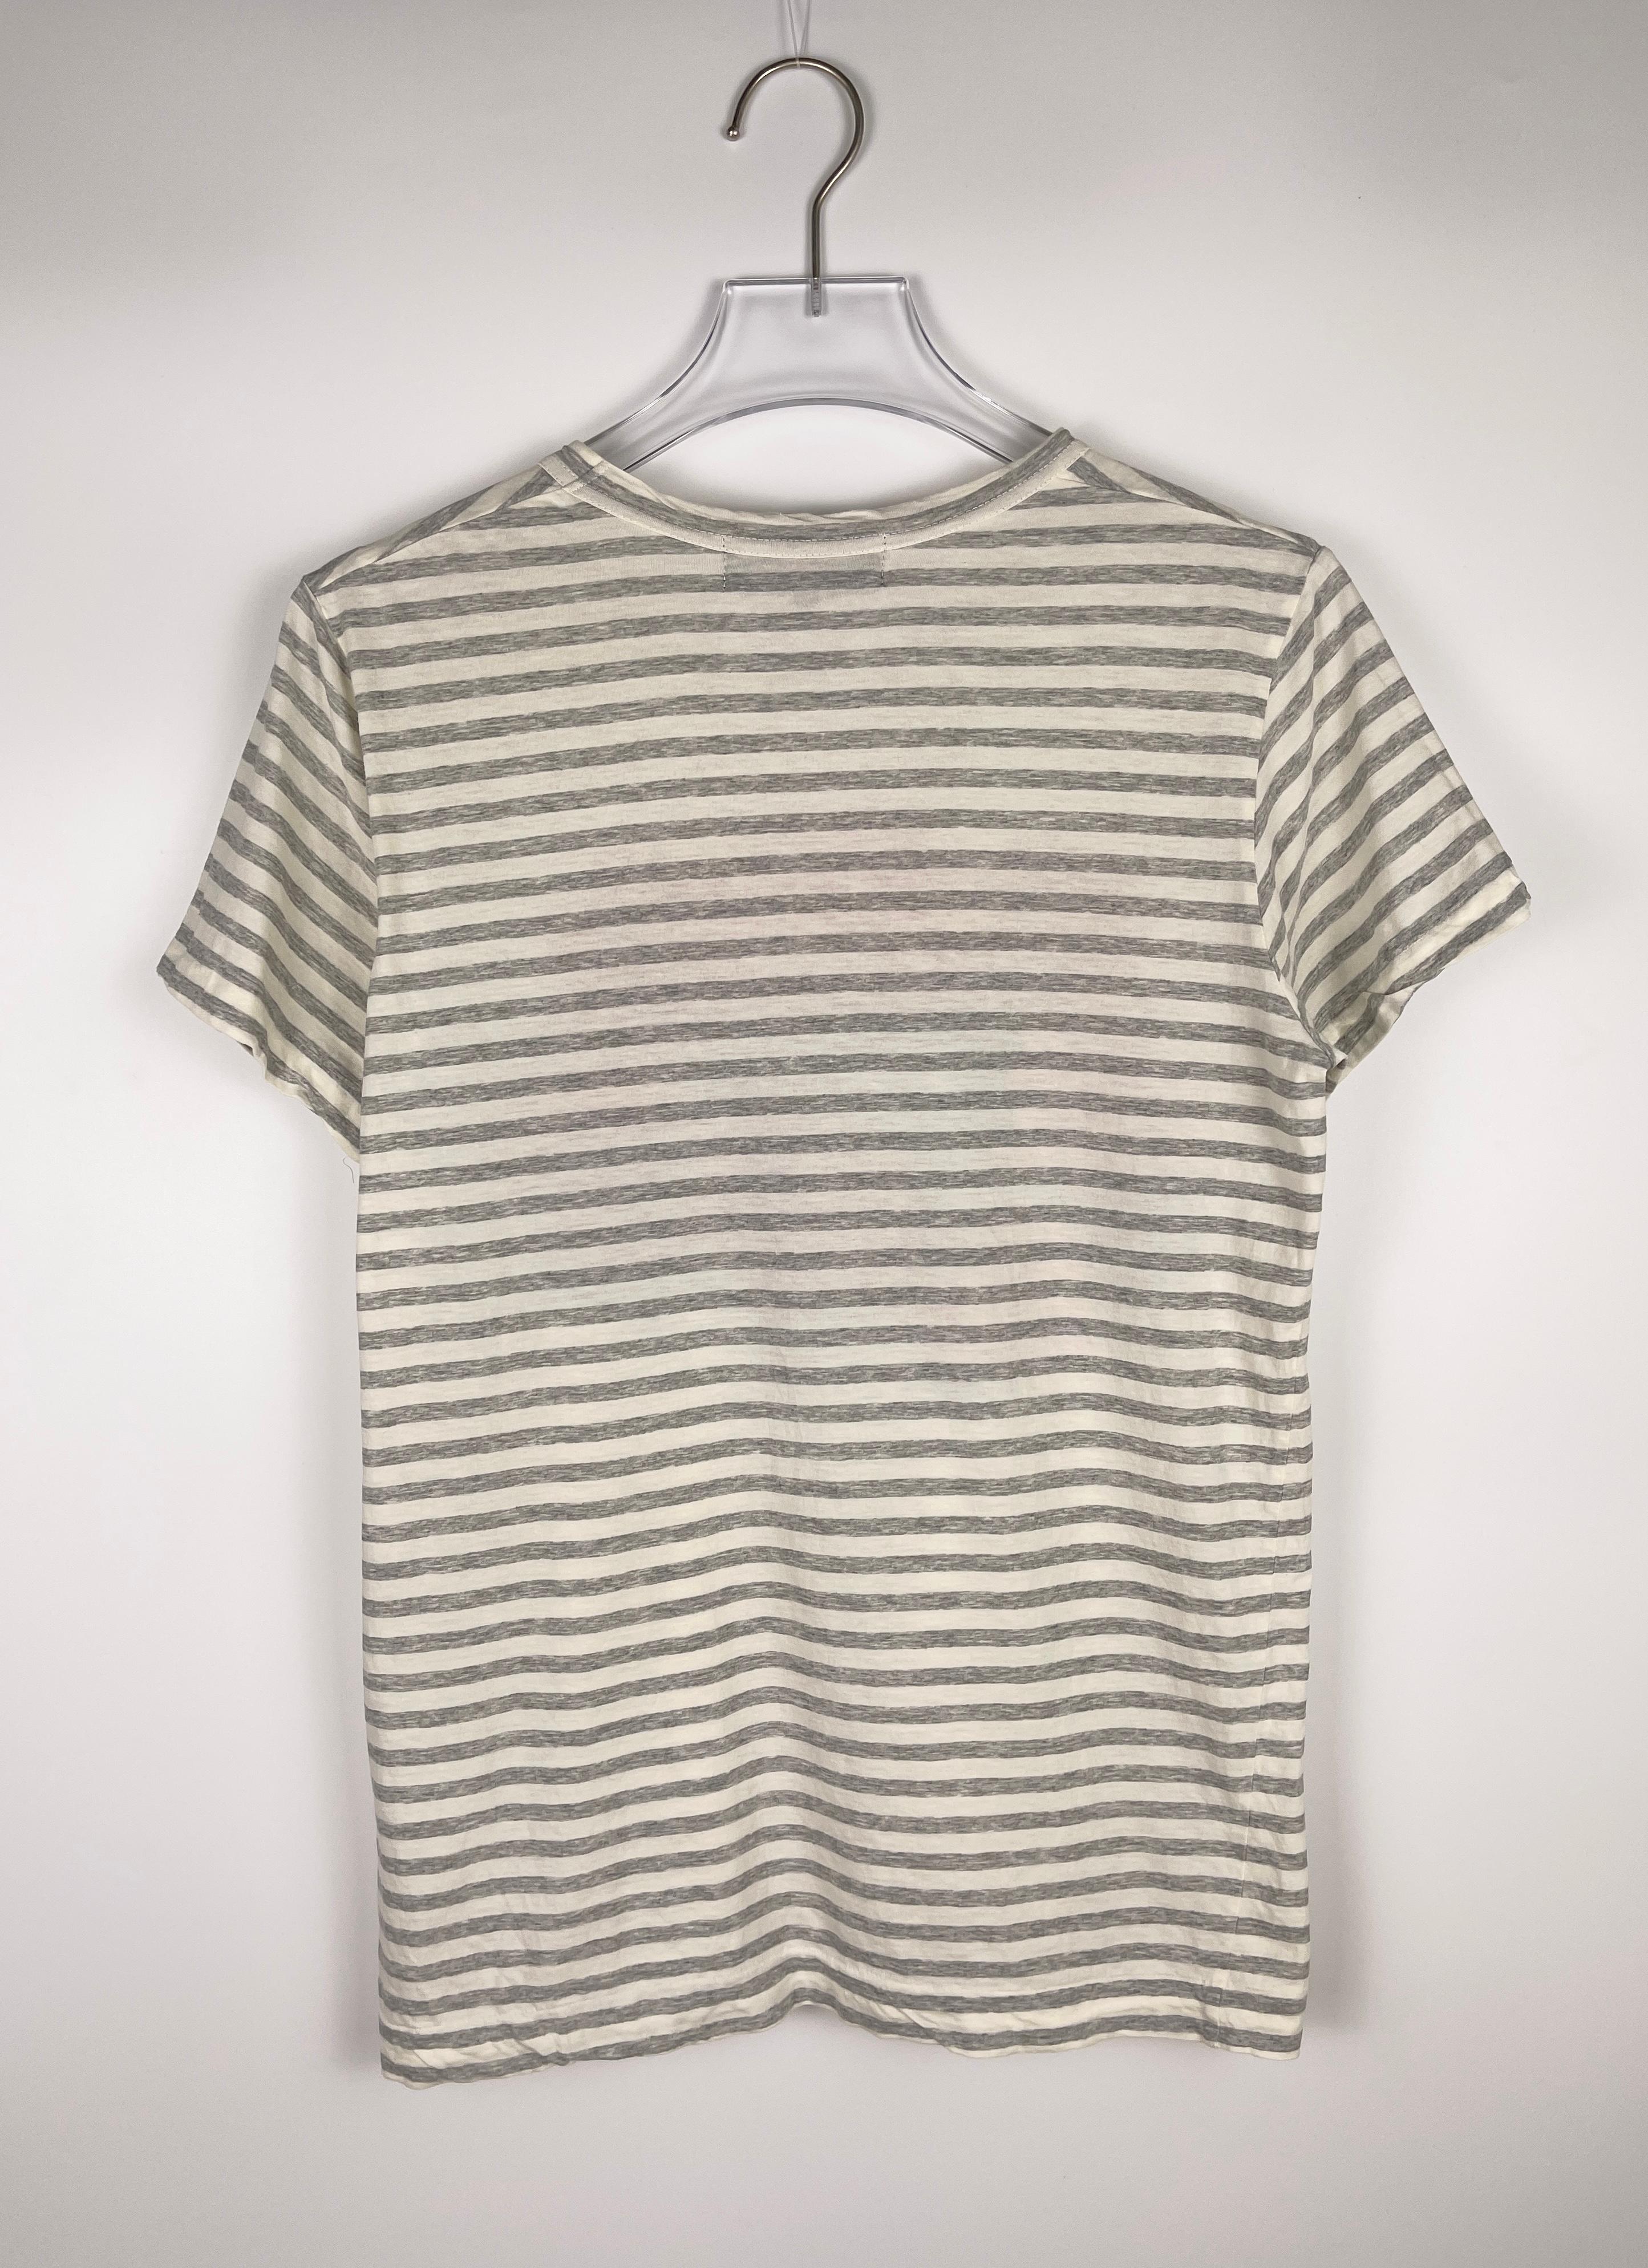 tricot Comme des Garcons S/S2012 Floral Striped T-Shirt In Excellent Condition For Sale In Seattle, WA